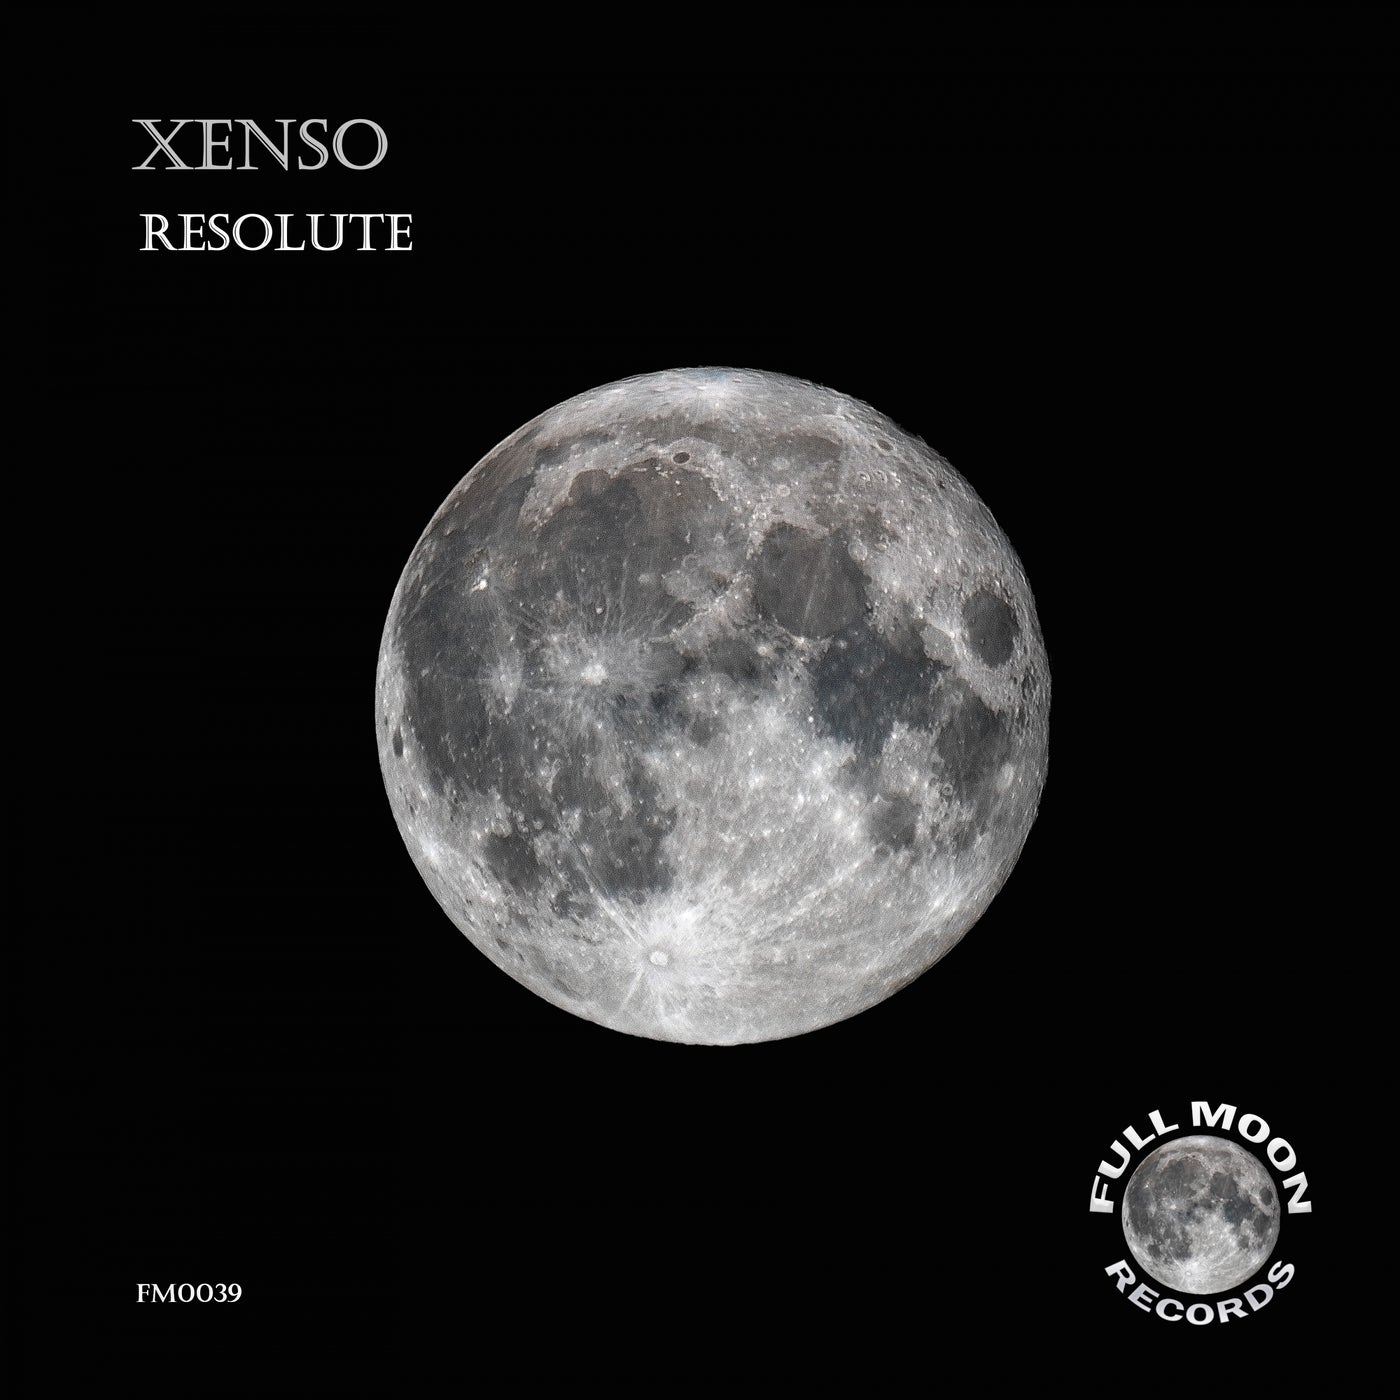 Xenso - Resolute [Full Moon Records]